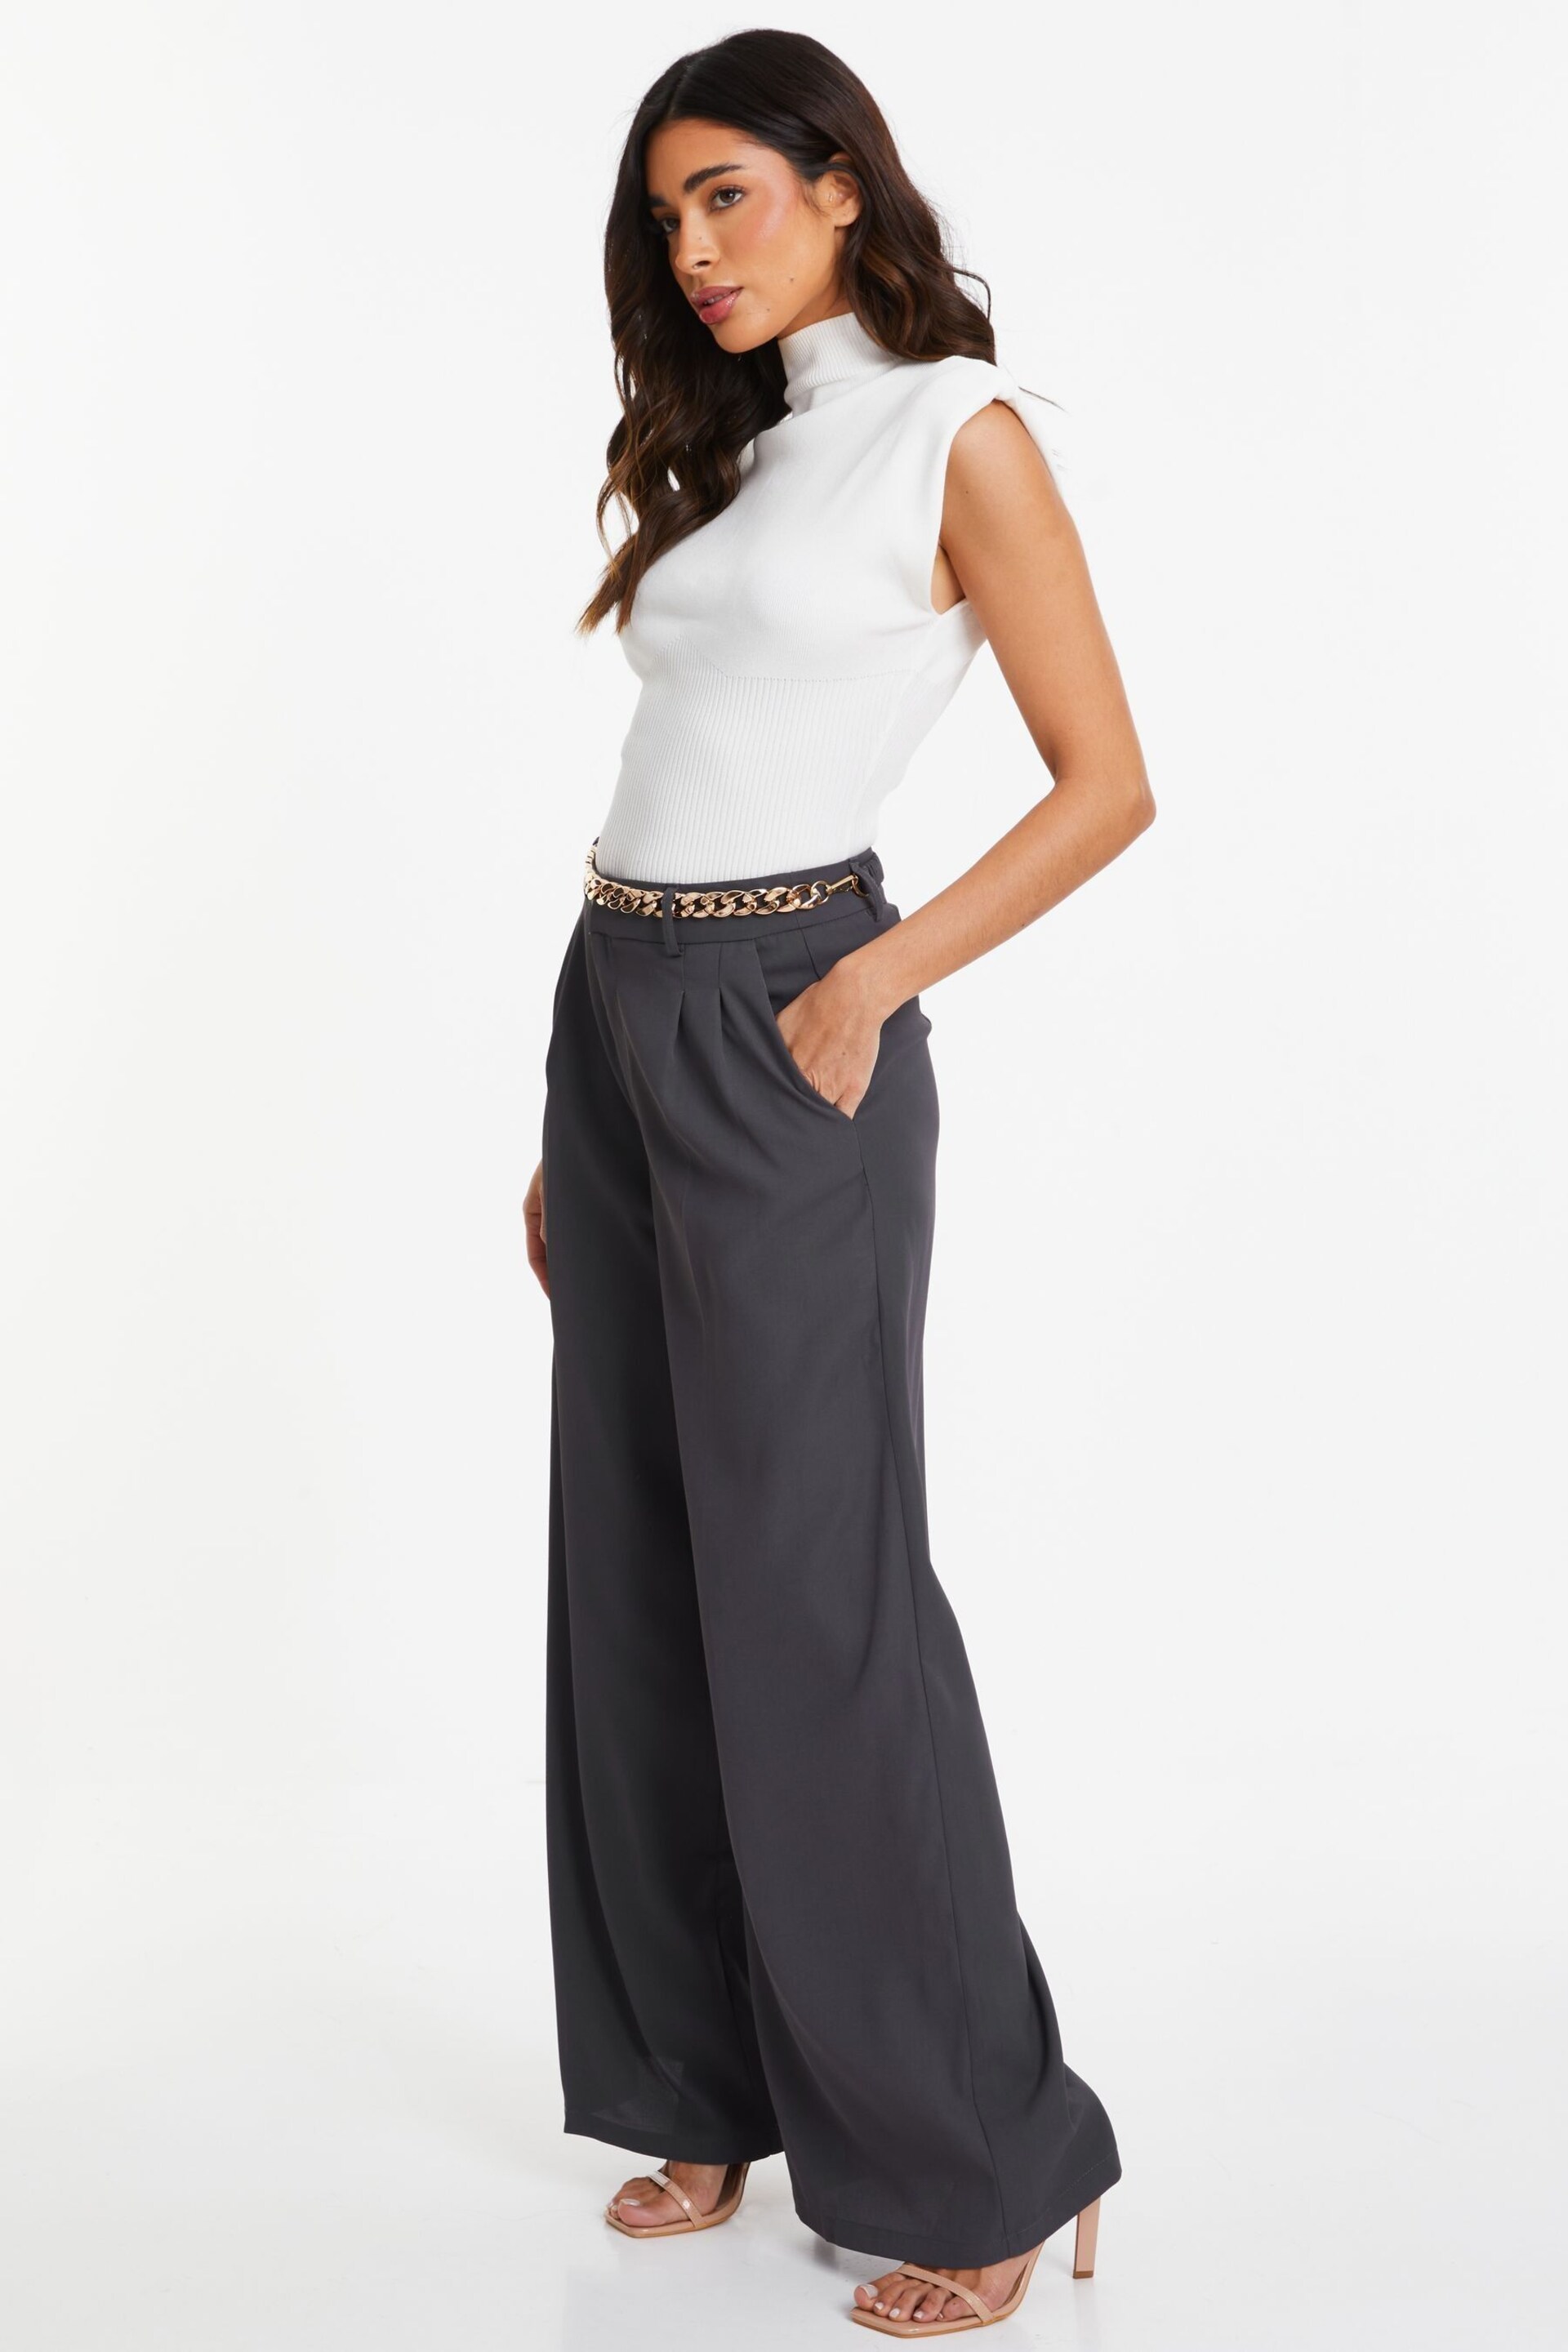 Quiz Grey Woven Wide Leg Trousers with Brown Chain Belt - Image 3 of 4